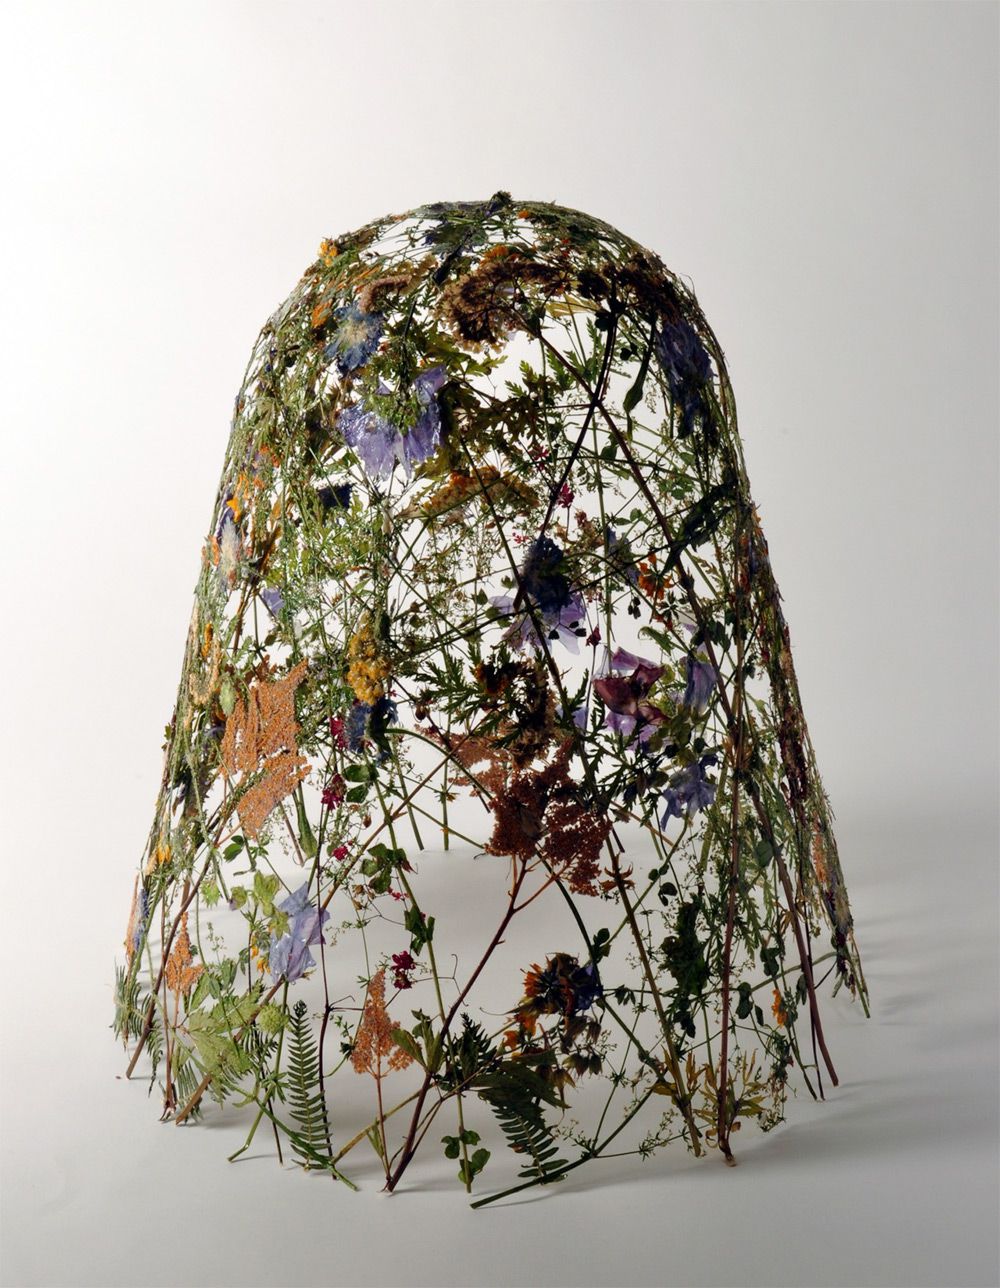 Delicate Vessels Made Of Pressed Flowers By Ignacio Canales Aracil 4